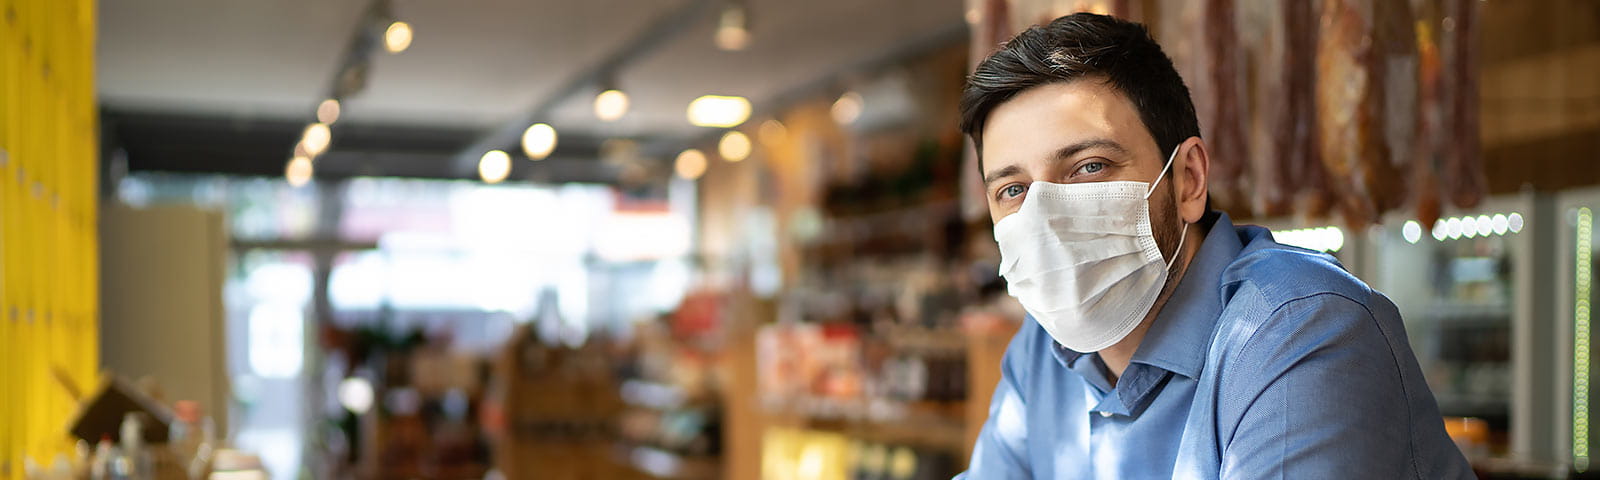 Business owner wearing protective mask to prevent the spread of COVID-19